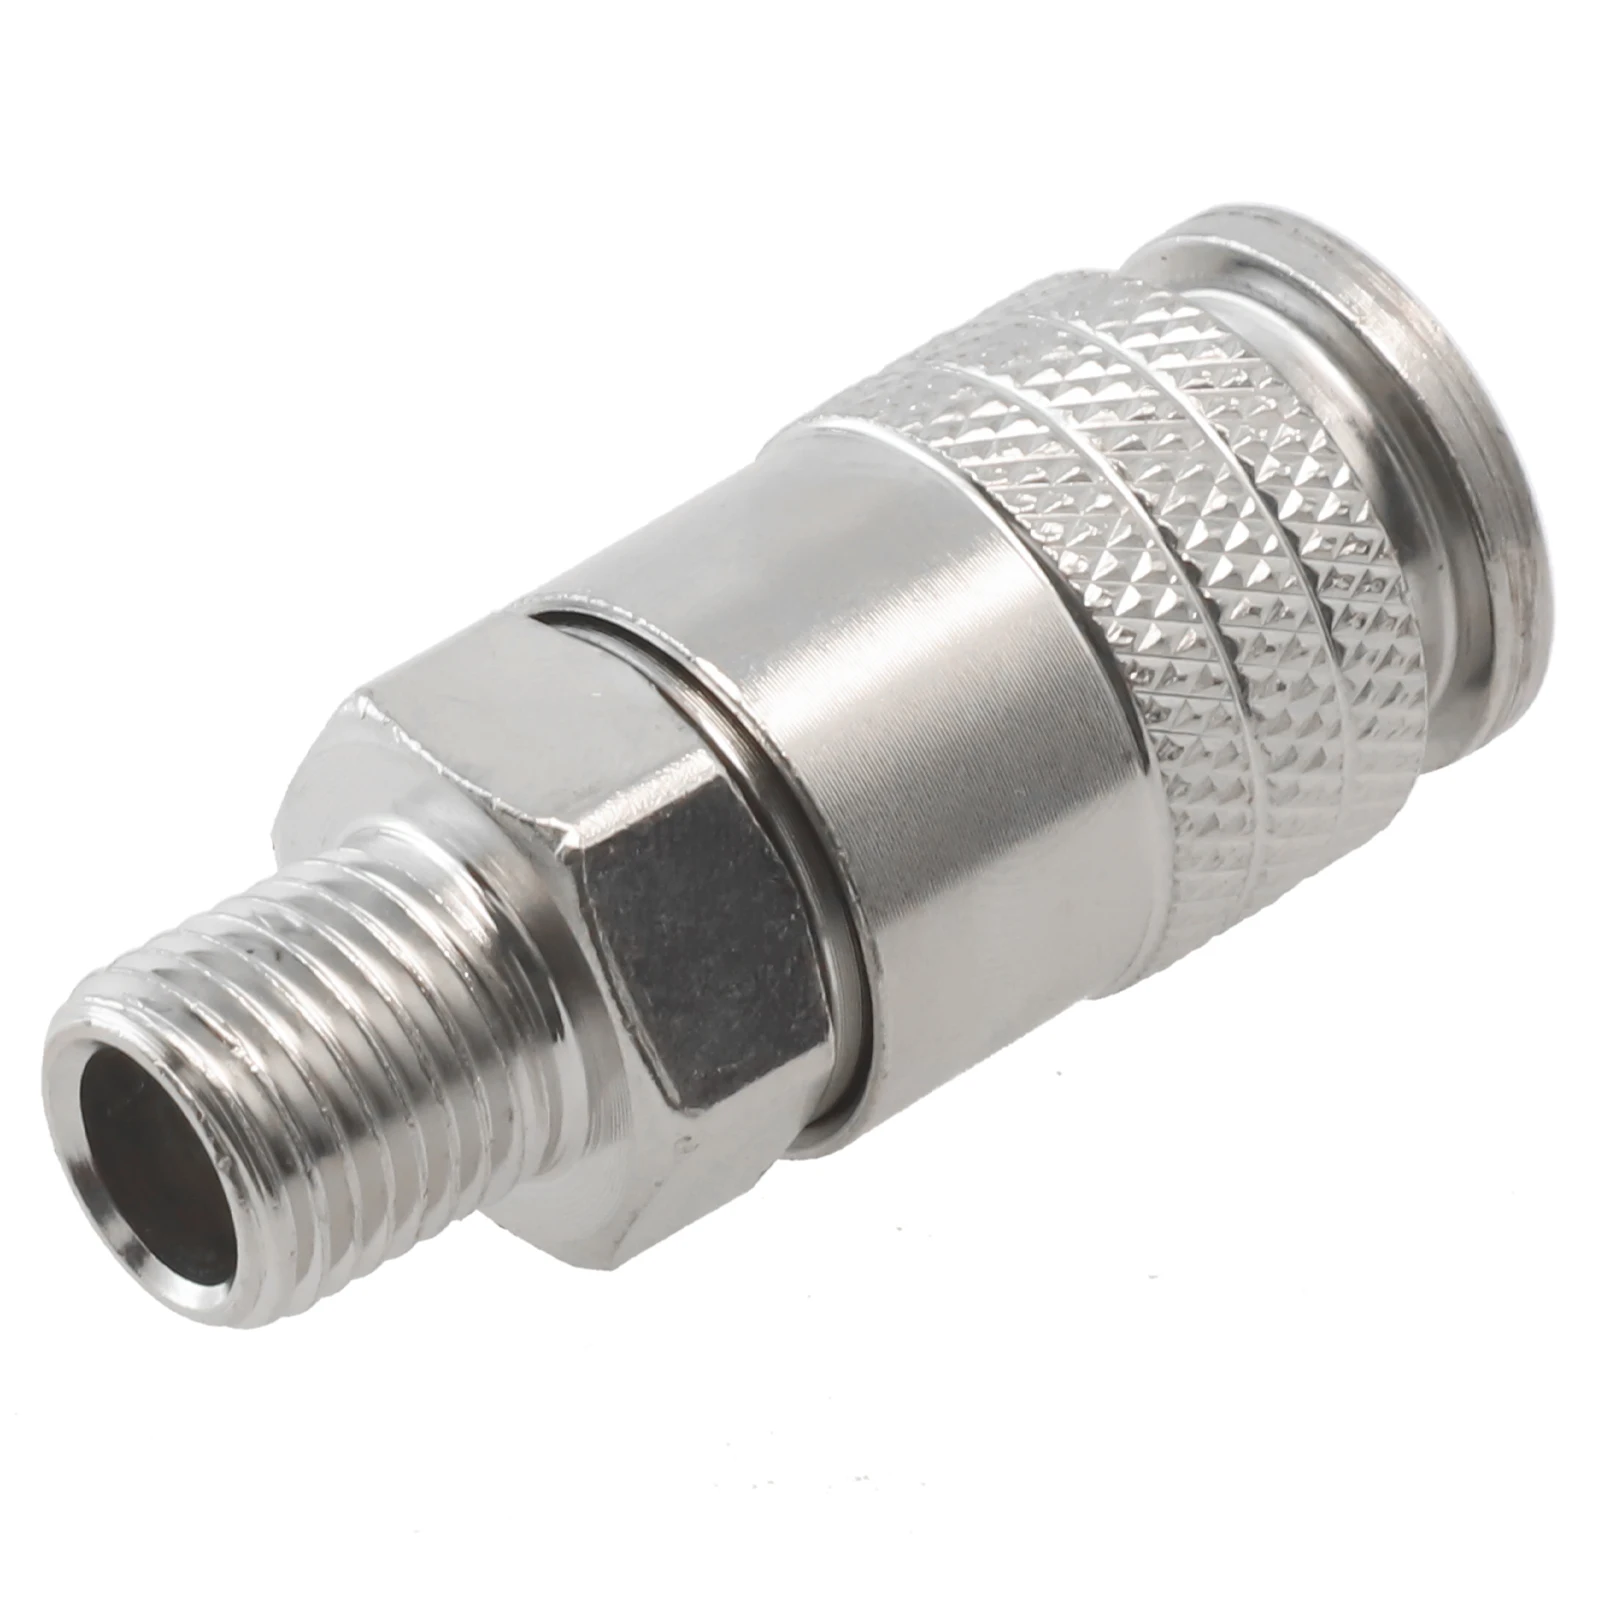 Pneumatic Fitting G1/4 Male Thread EU Standard Quick Connector For Air Compressor 53mm Length Air Compressor Tool Parts 3dsway 3d printer parts pc4 01 quick connector pneumatic fittings connector 4 2 feeding ptfe for e3dv6 hotend 1 75mm filament